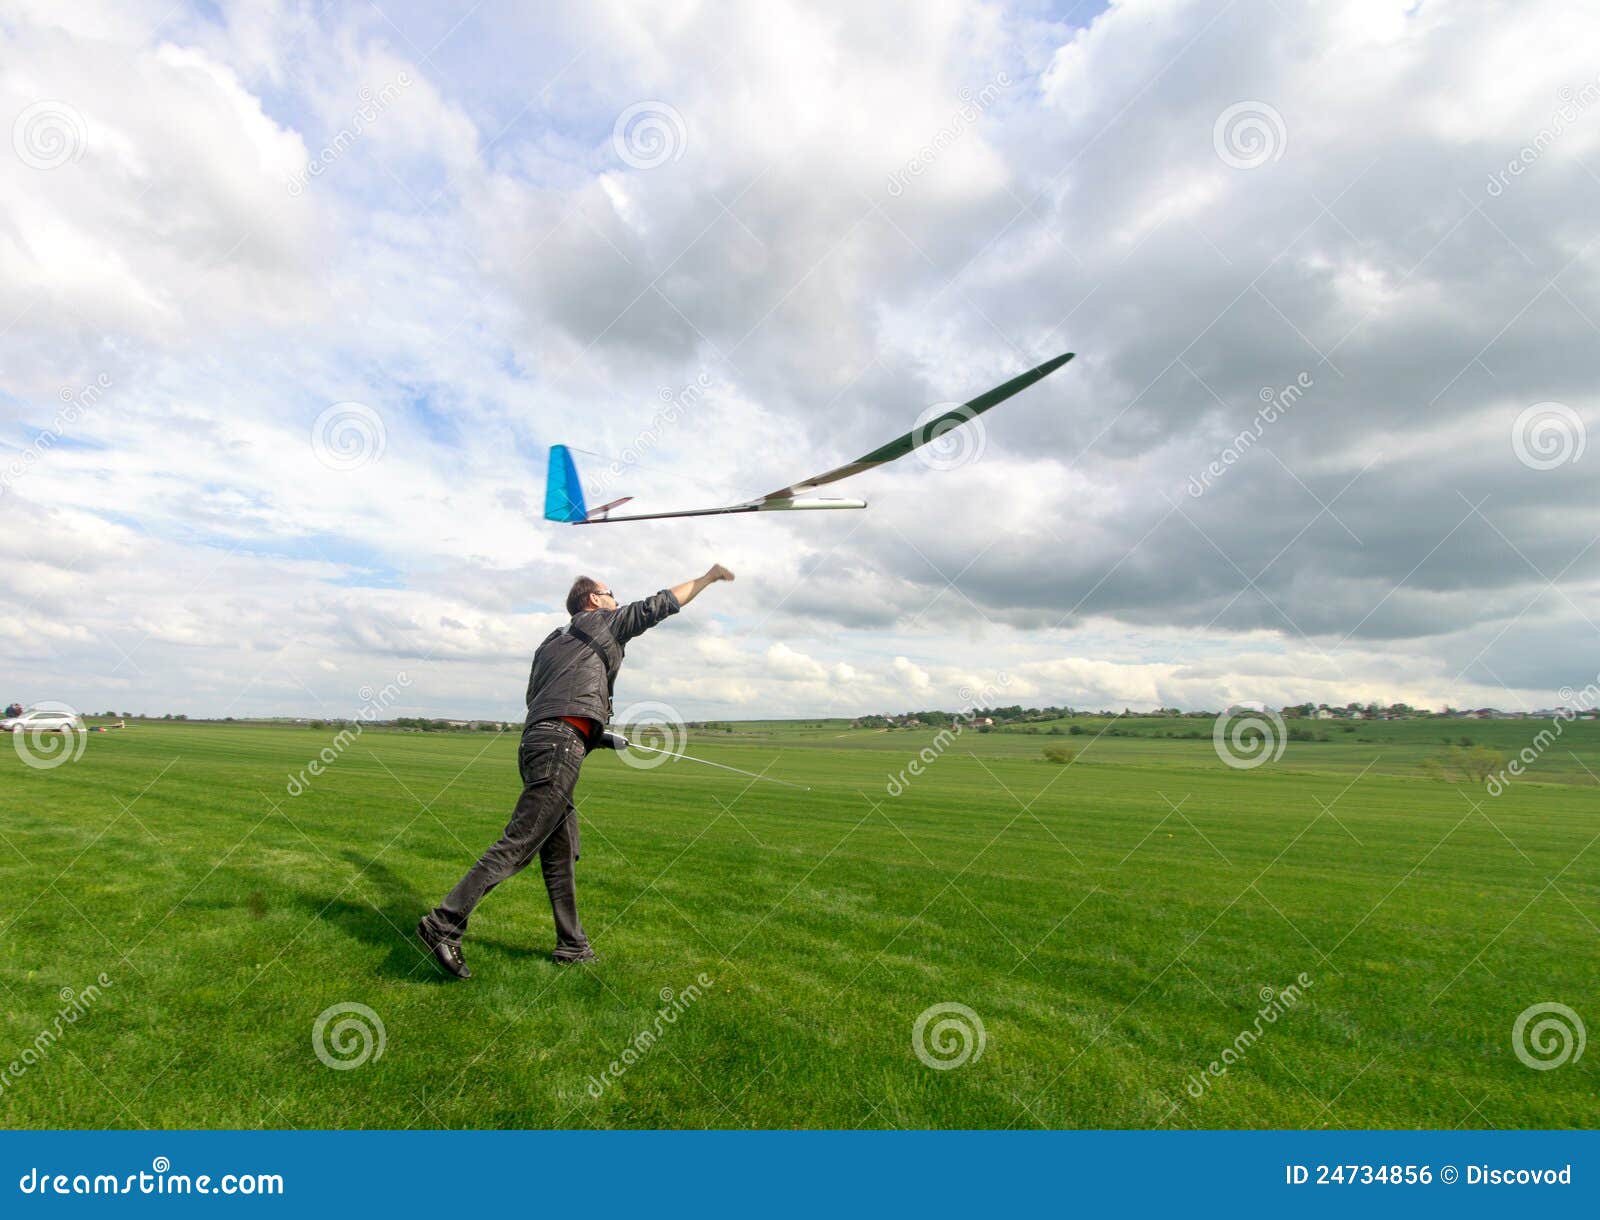 Man Launches into the Sky RC Glider Stock Photo - Image of antenna ...